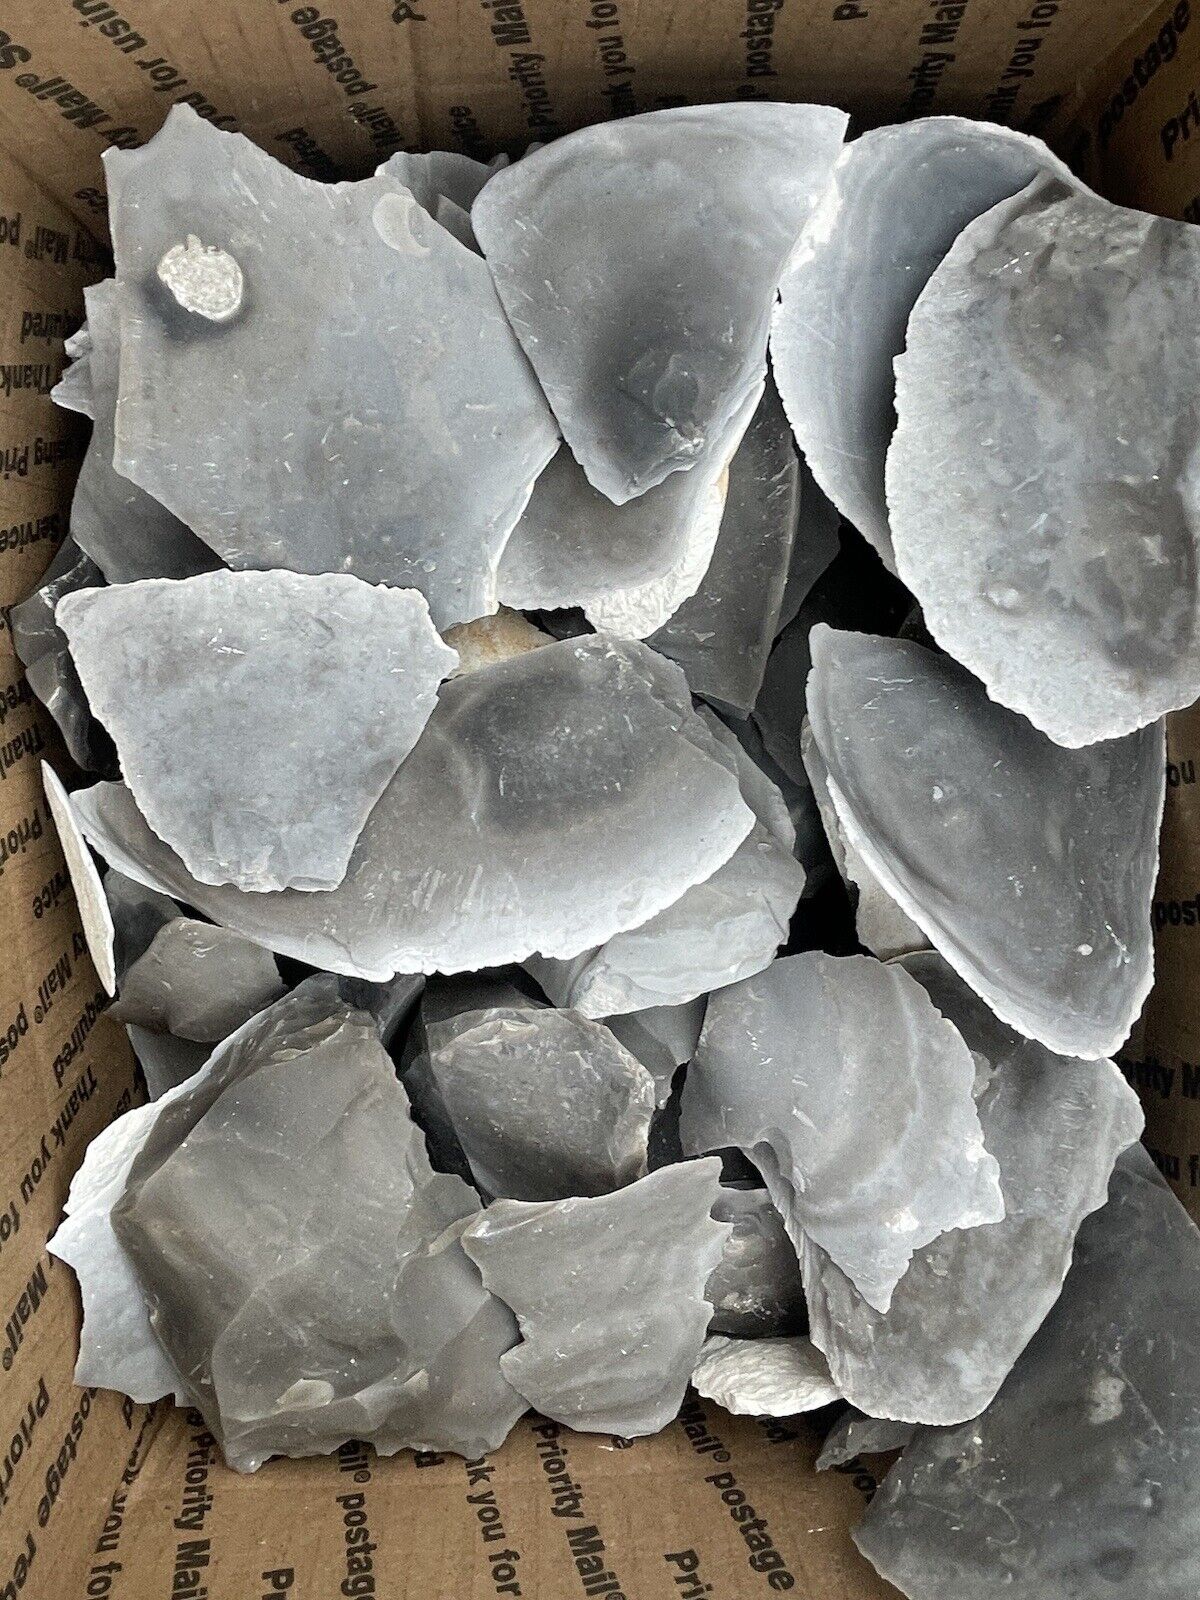 6 Pounds Of High Quality Heat Treated Georgetown ( Big Spalls) Flint Knapping